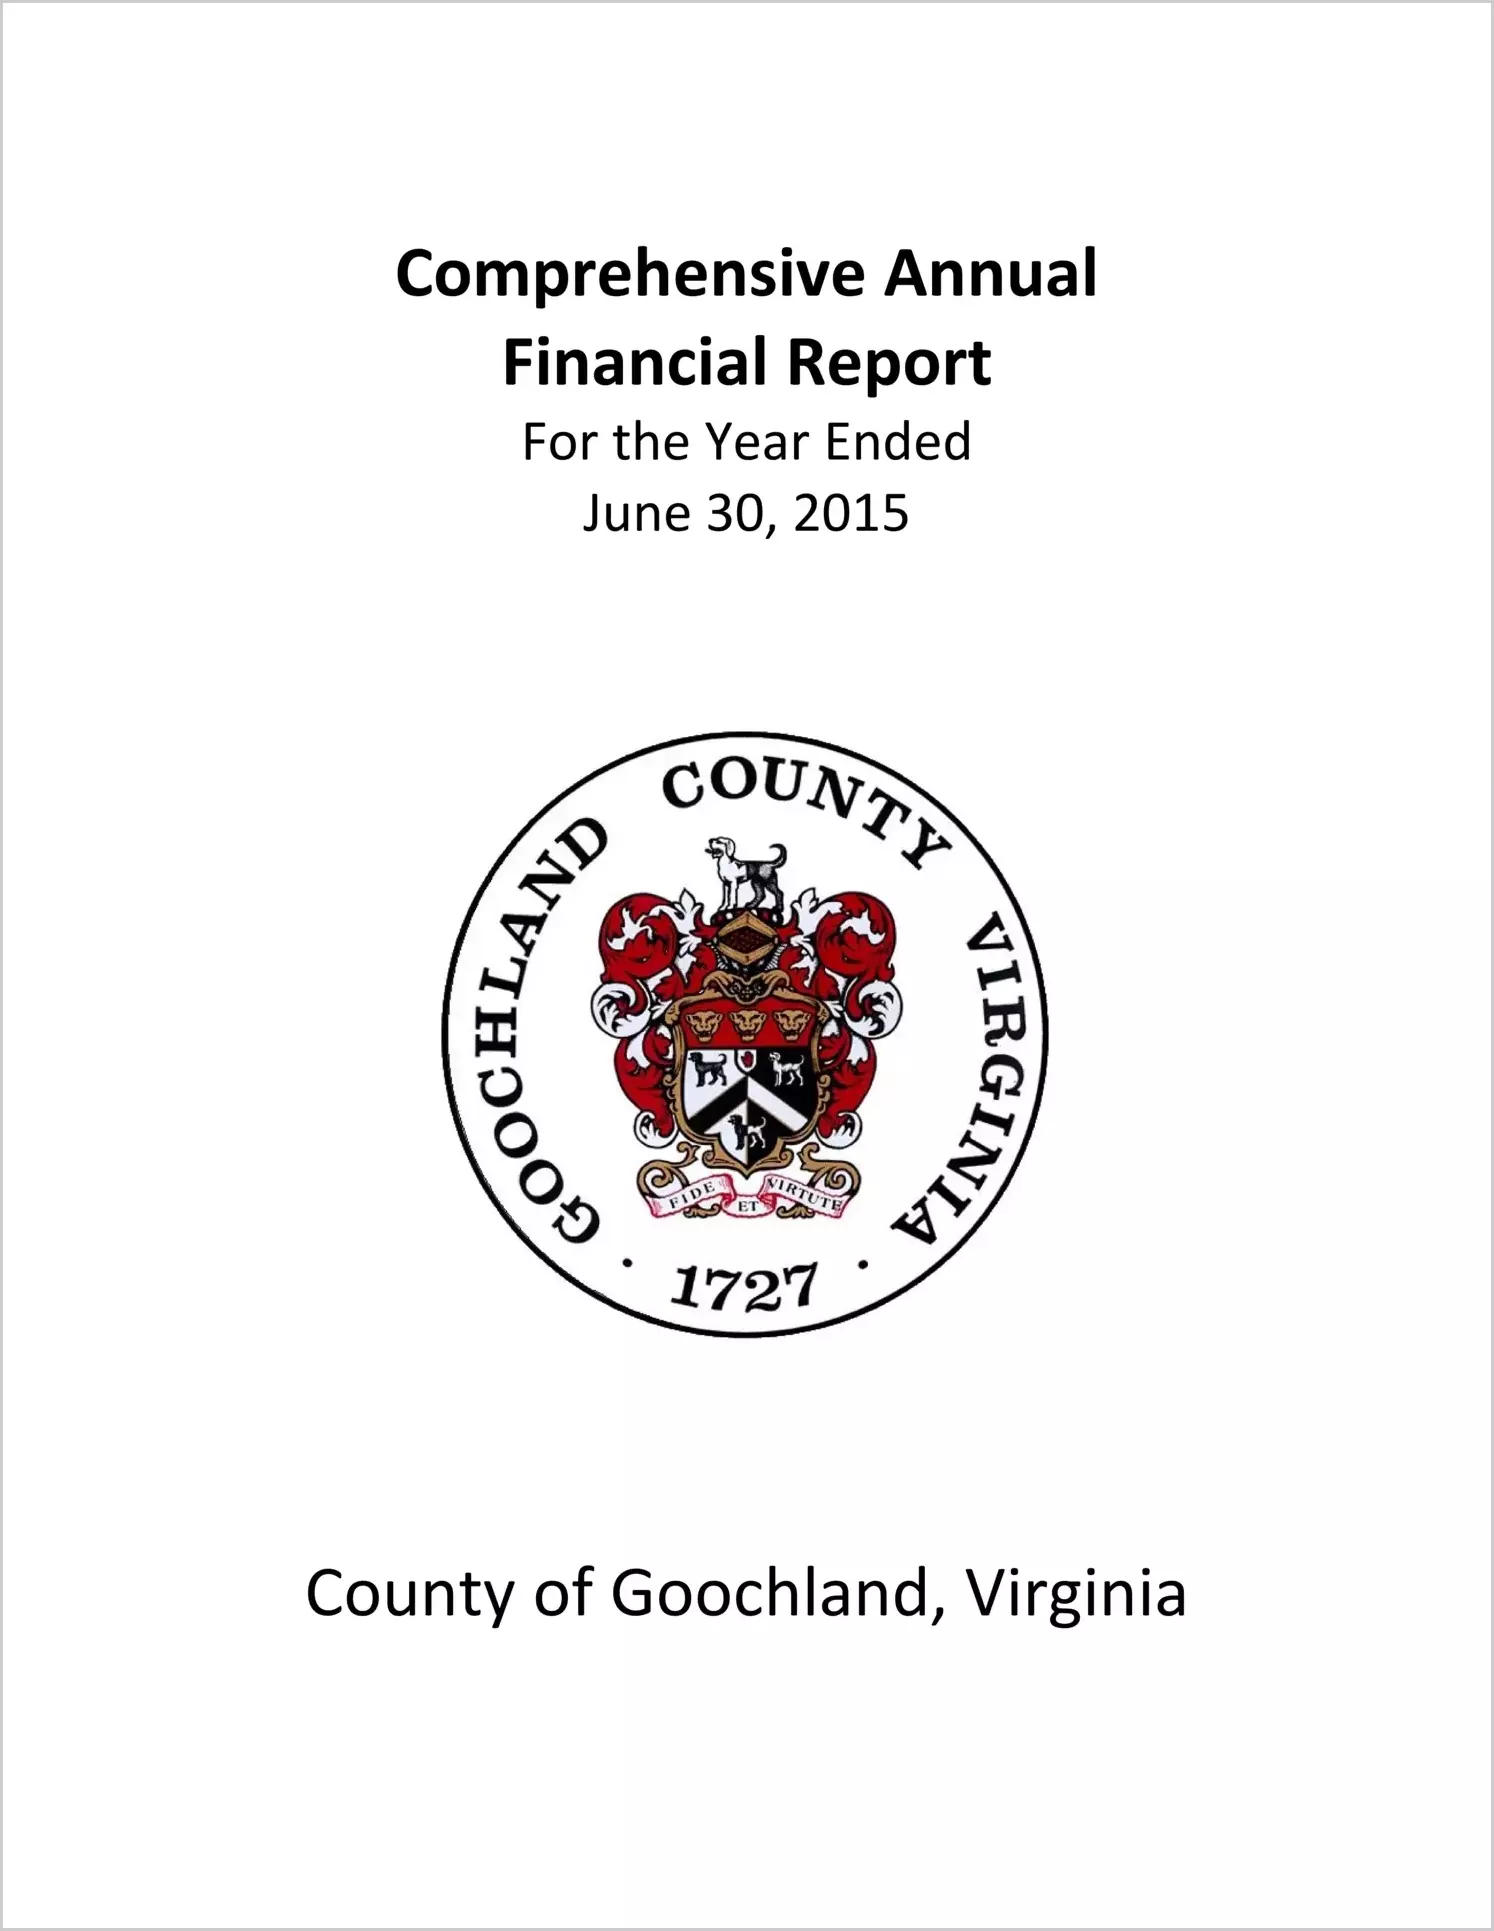 2015 Annual Financial Report for County of Goochland